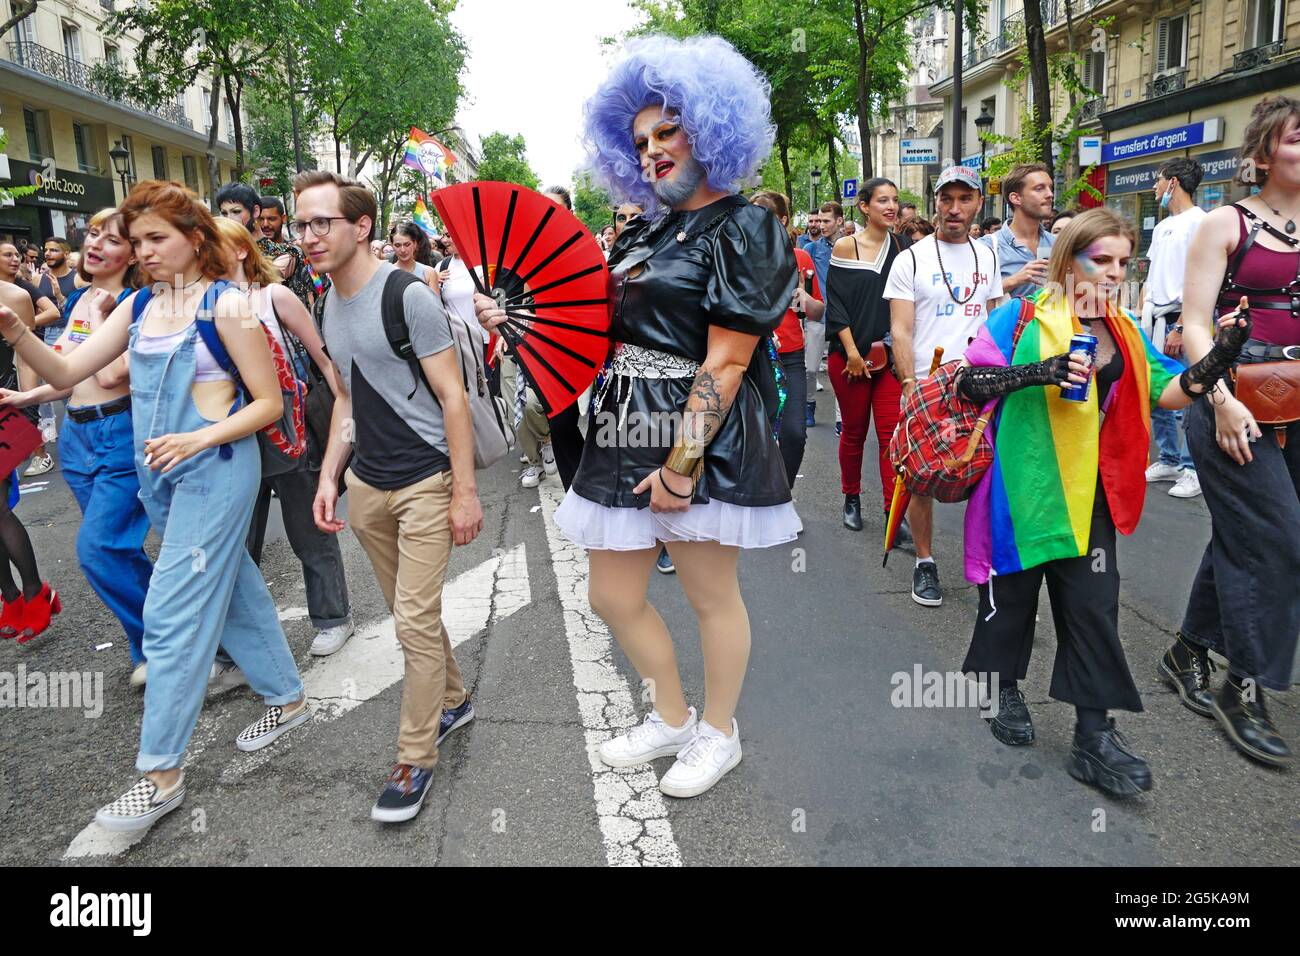 Paris, France. 27th June, 2021. A famous French Drag Queen, The Big Bertha poses for a photo during the Gay Pride March in Paris. Thousands of LGBT members and their supporters took part in the Gay Pride March in Paris to celebrate Pride Month. Credit: SOPA Images Limited/Alamy Live News Stock Photo